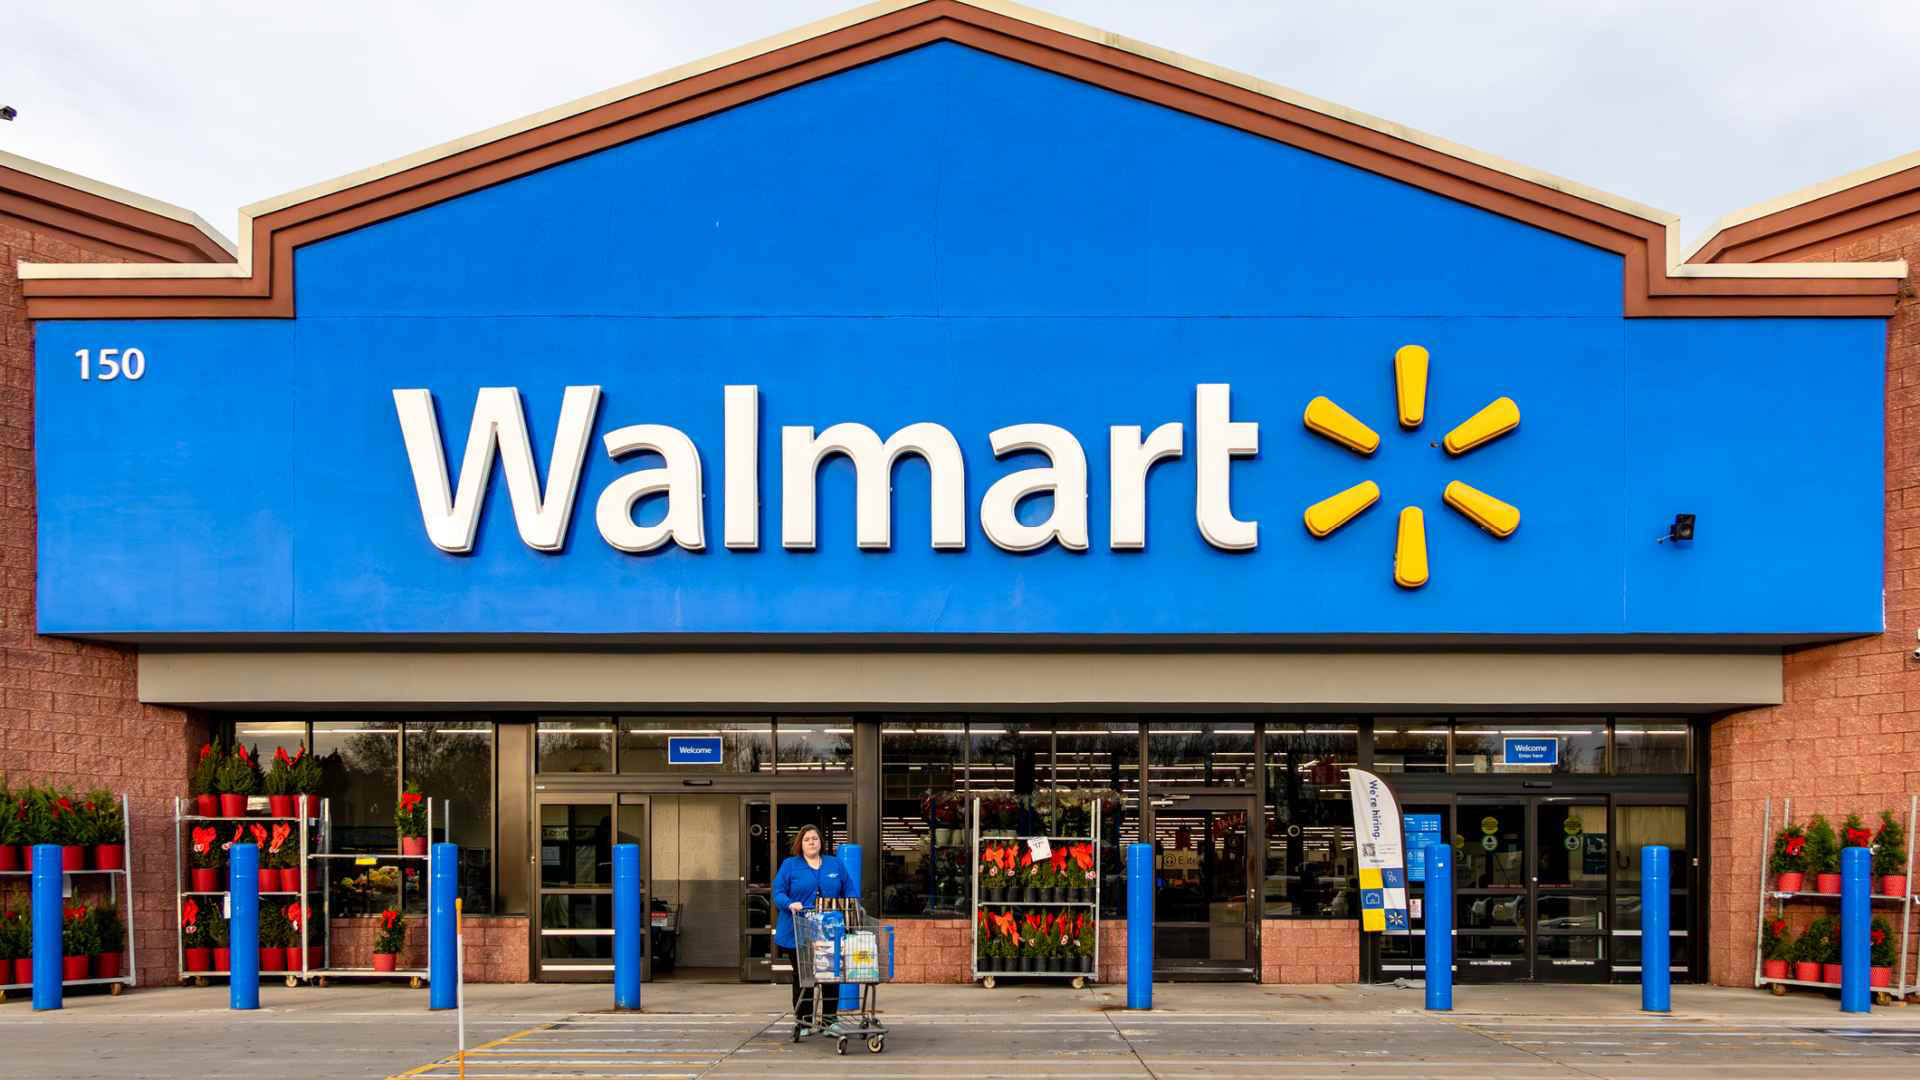 10 Best Walmart Items To Buy for $100 or More